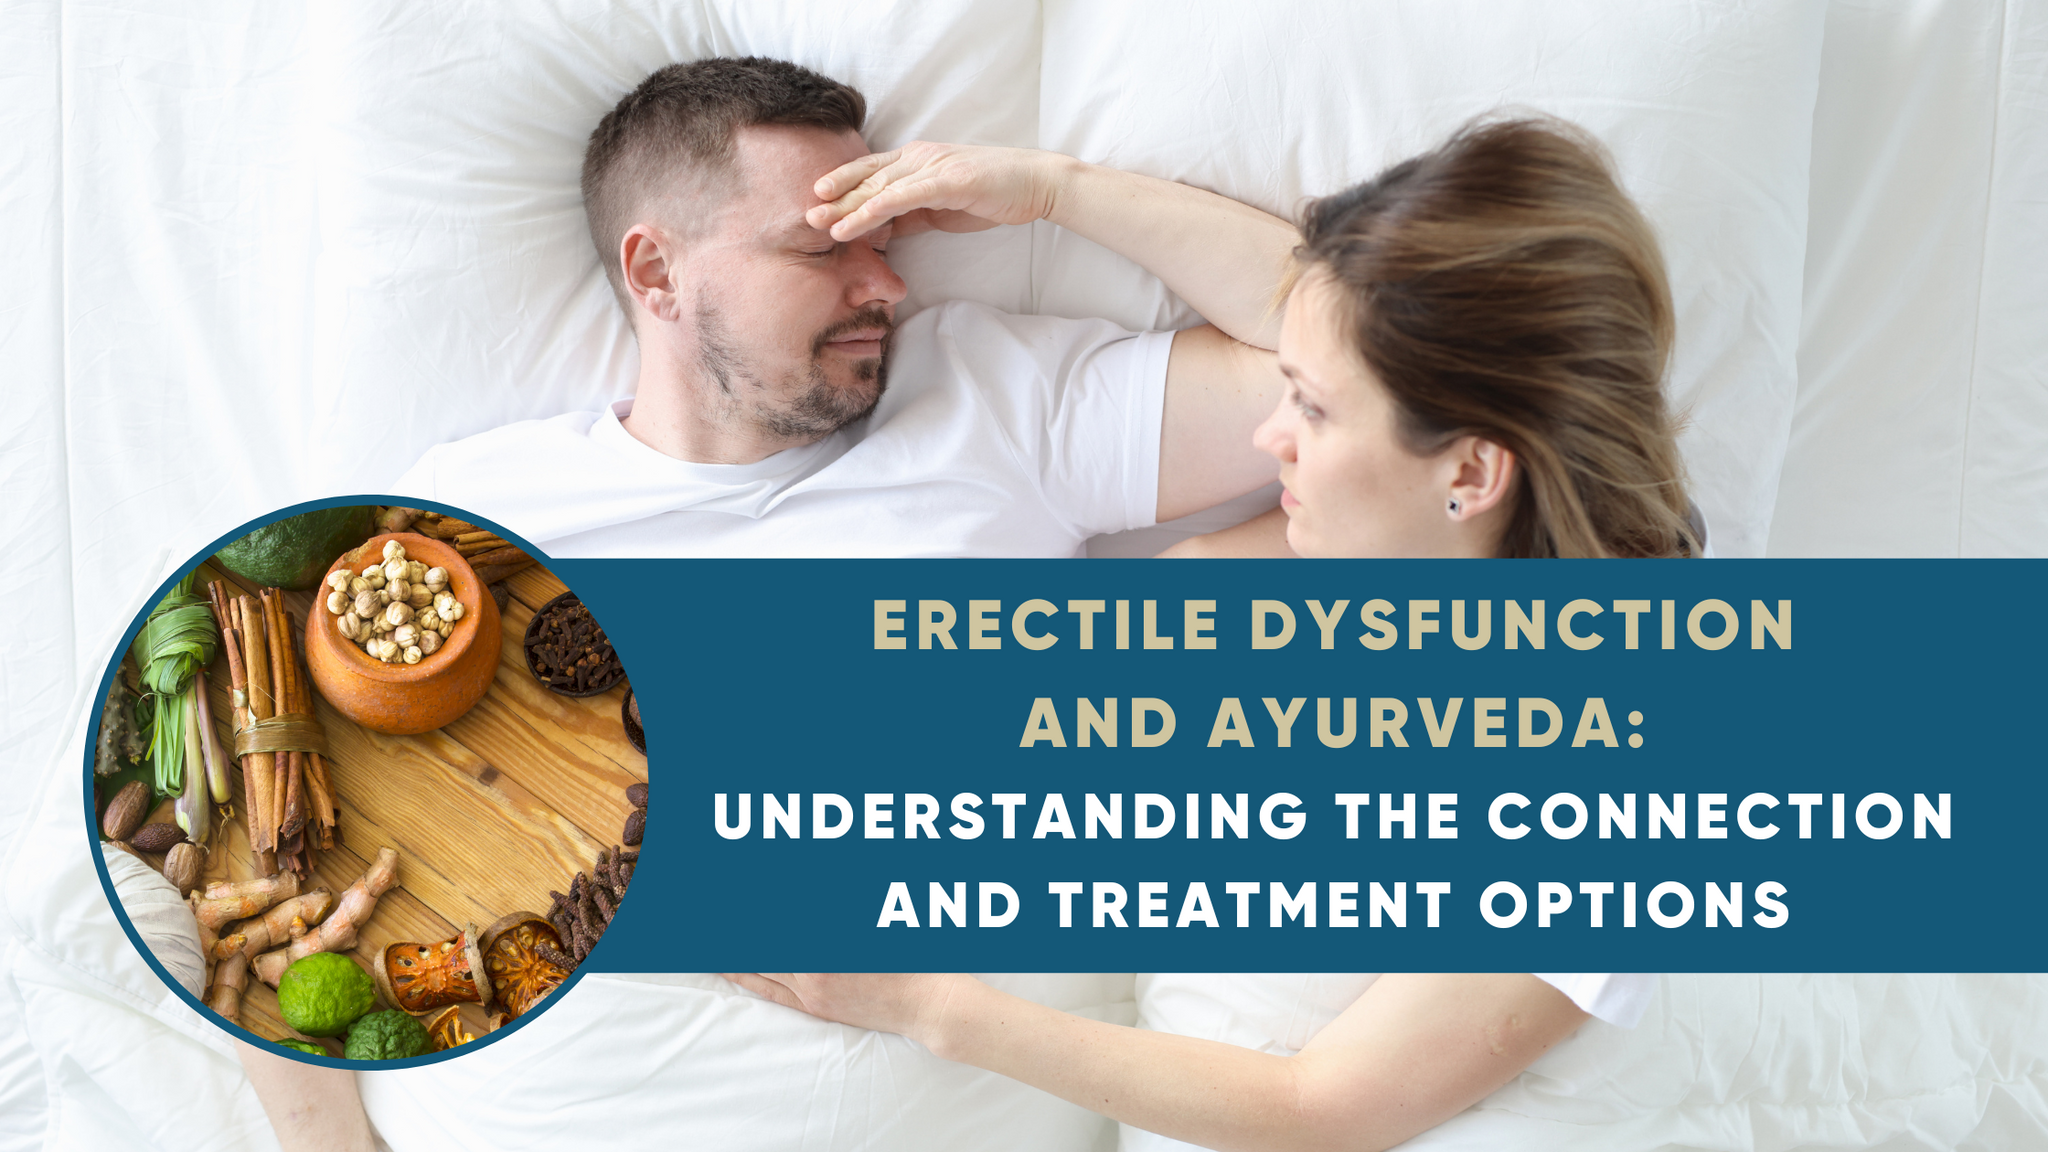 ERECTILE DYSFUNCTION AND AYURVEDA: UNDERSTANDING THE CONNECTION AND TREATMENT OPTIONS